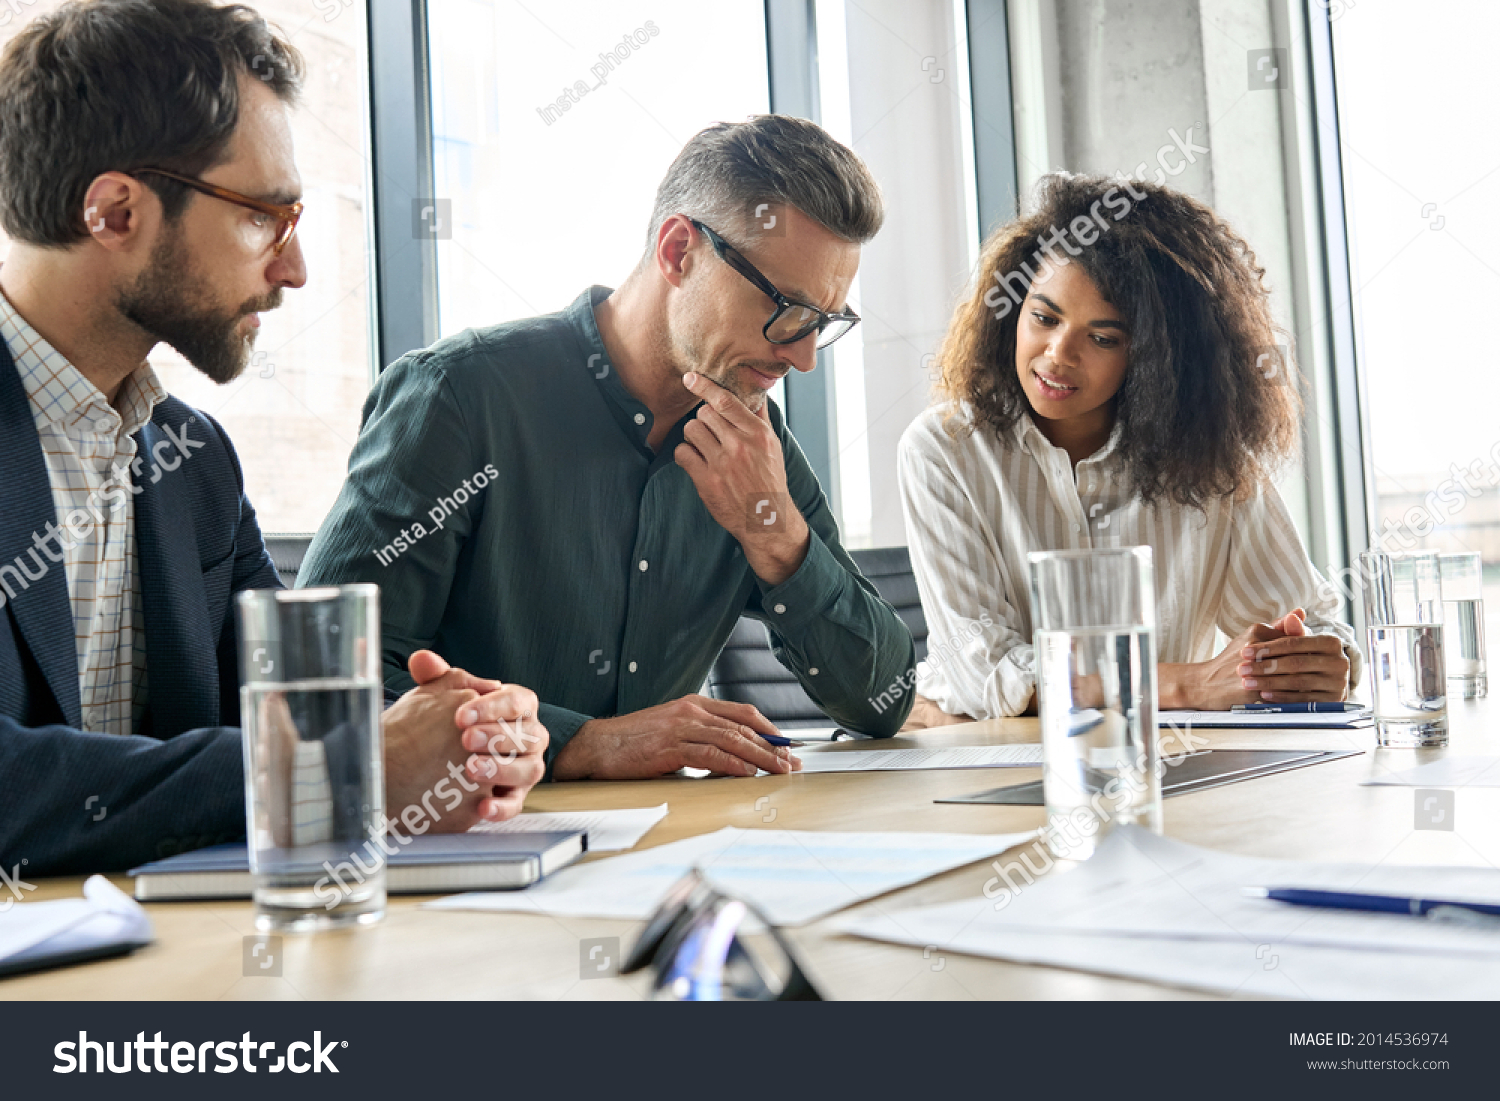 Focused doubtful mature businessman reading contract document thinking considering risks with professional lawyers legal experts executive team analyzing financial report sitting at office table. #2014536974